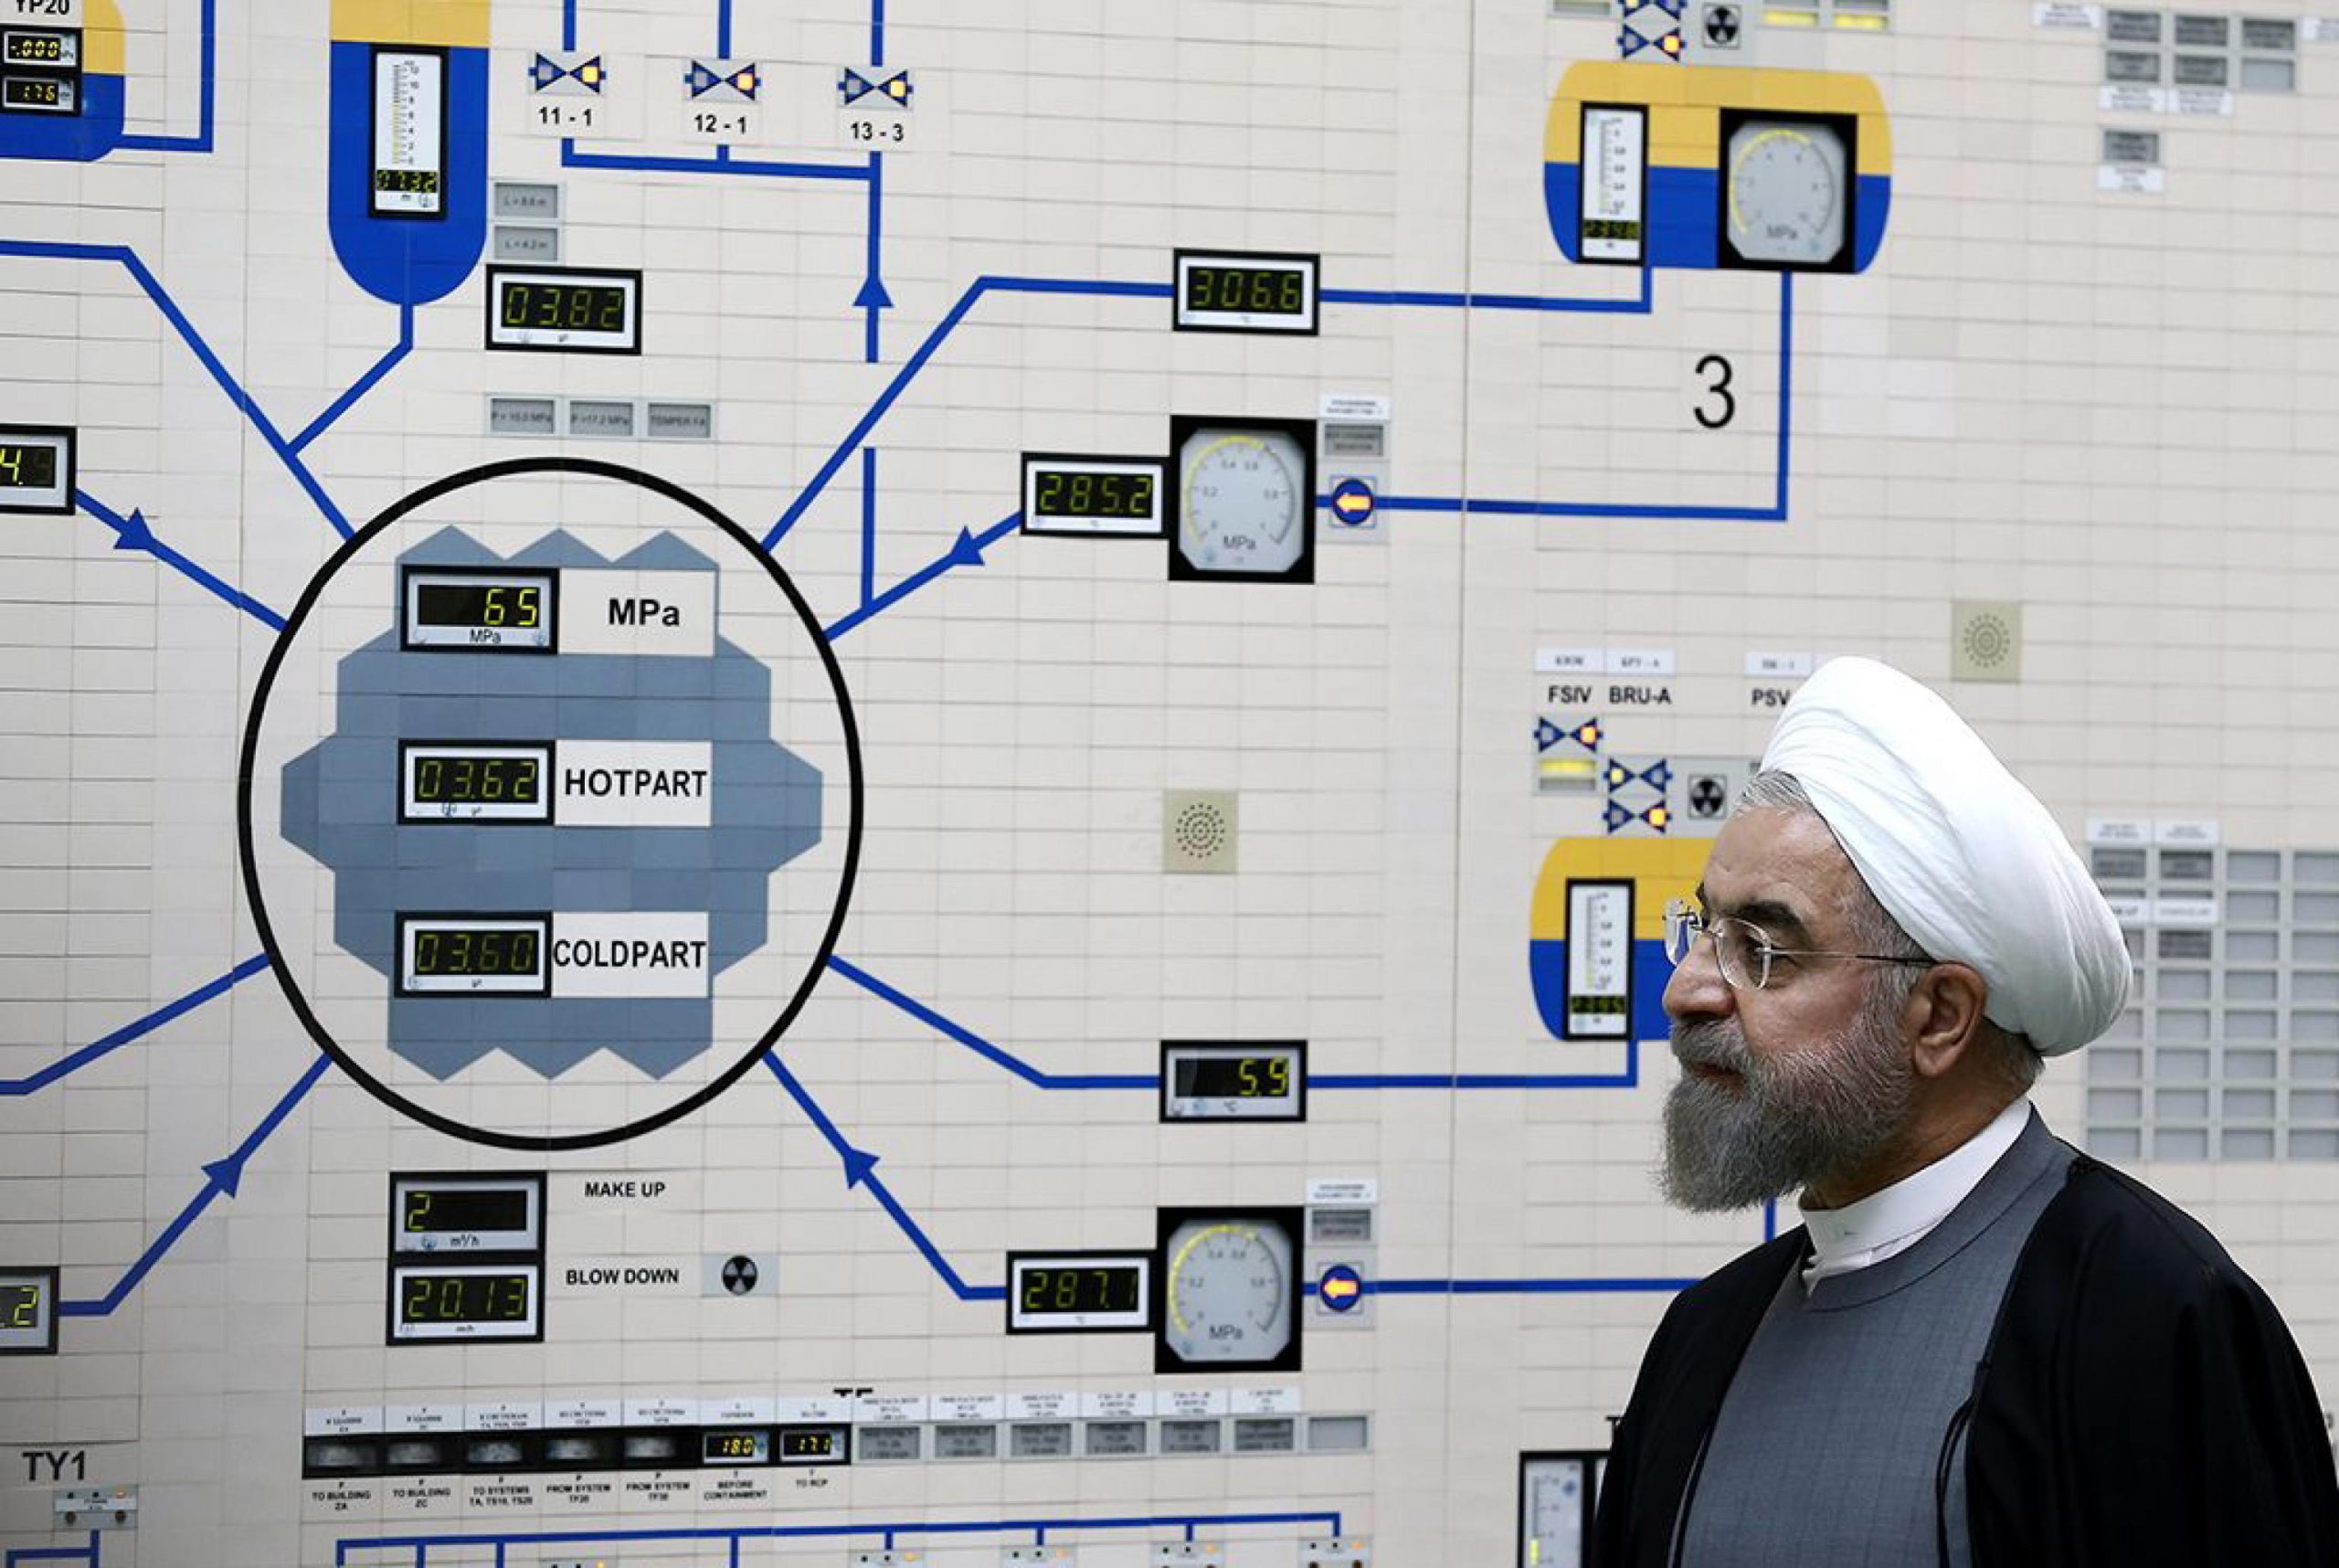 Iran and the United States, who will take the first step on nuclear energy?